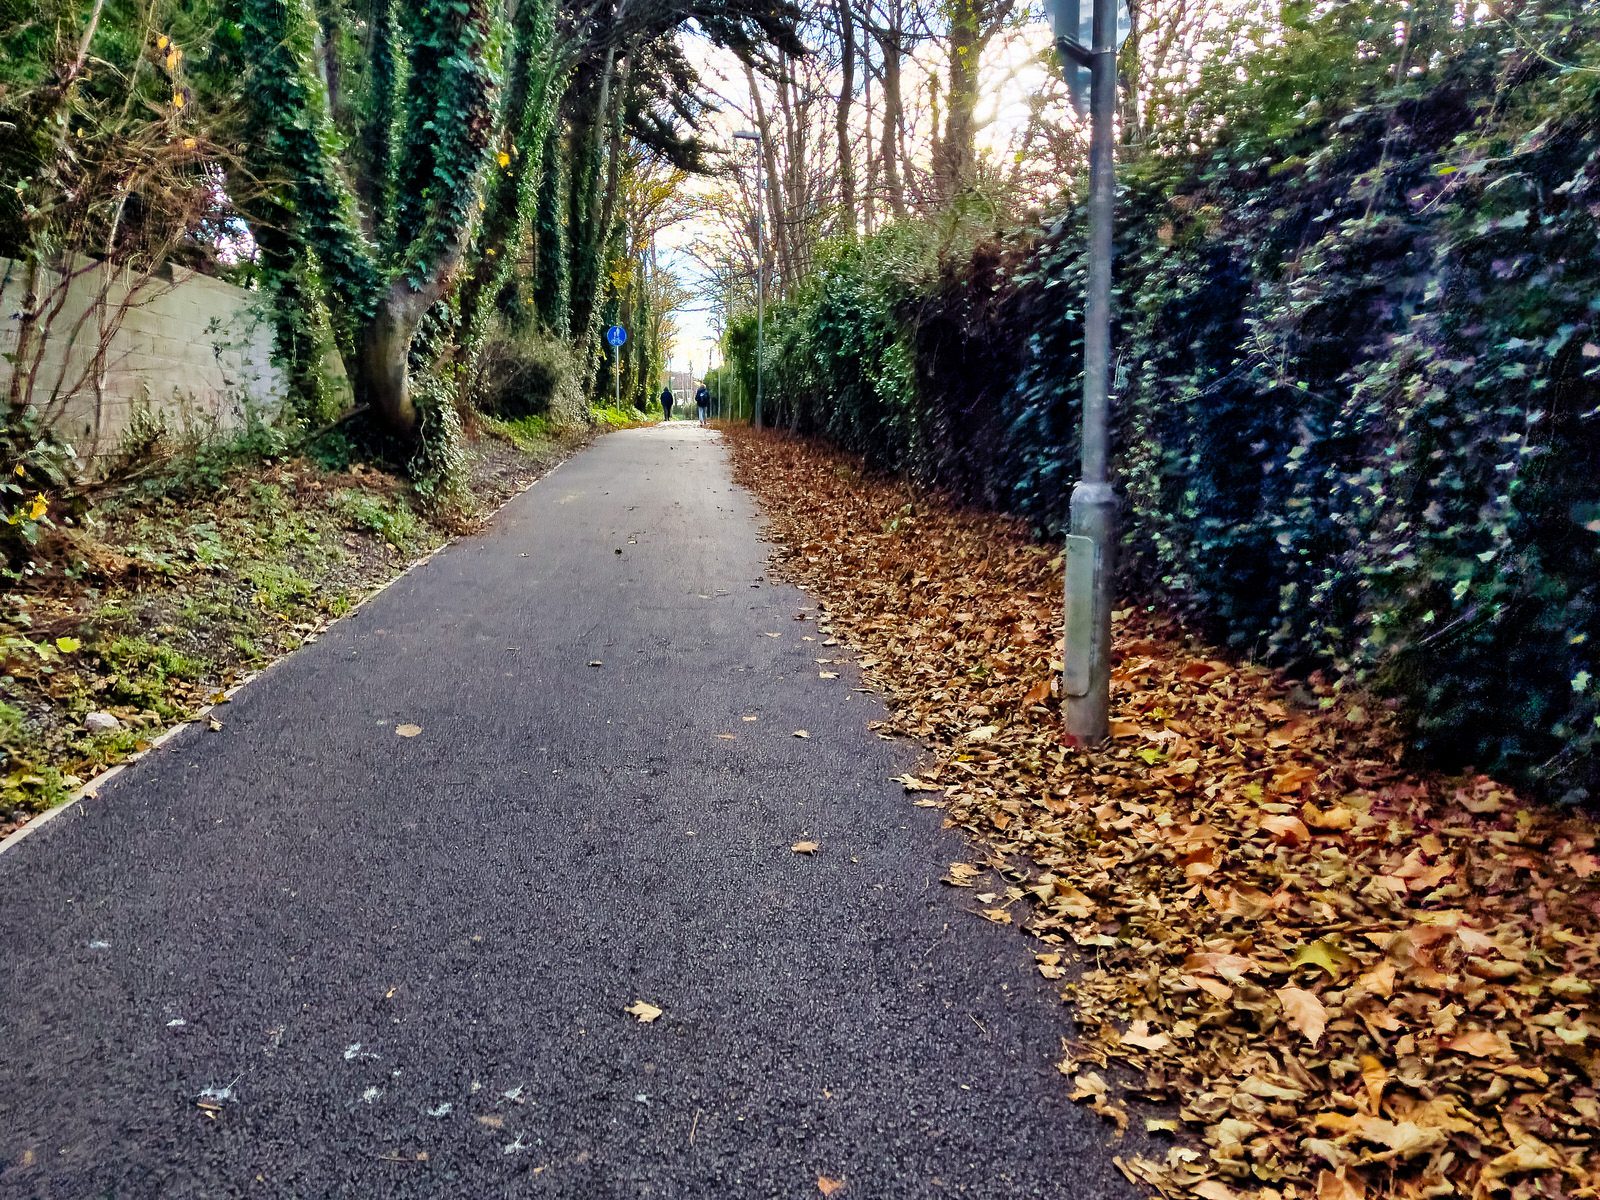 MY FIRST DAY WITHOUT THE 17 BUS SERVICE [WALK FROM S4 BUS STOP IN UCD TO ROEBUCK ROAD]-225586-1